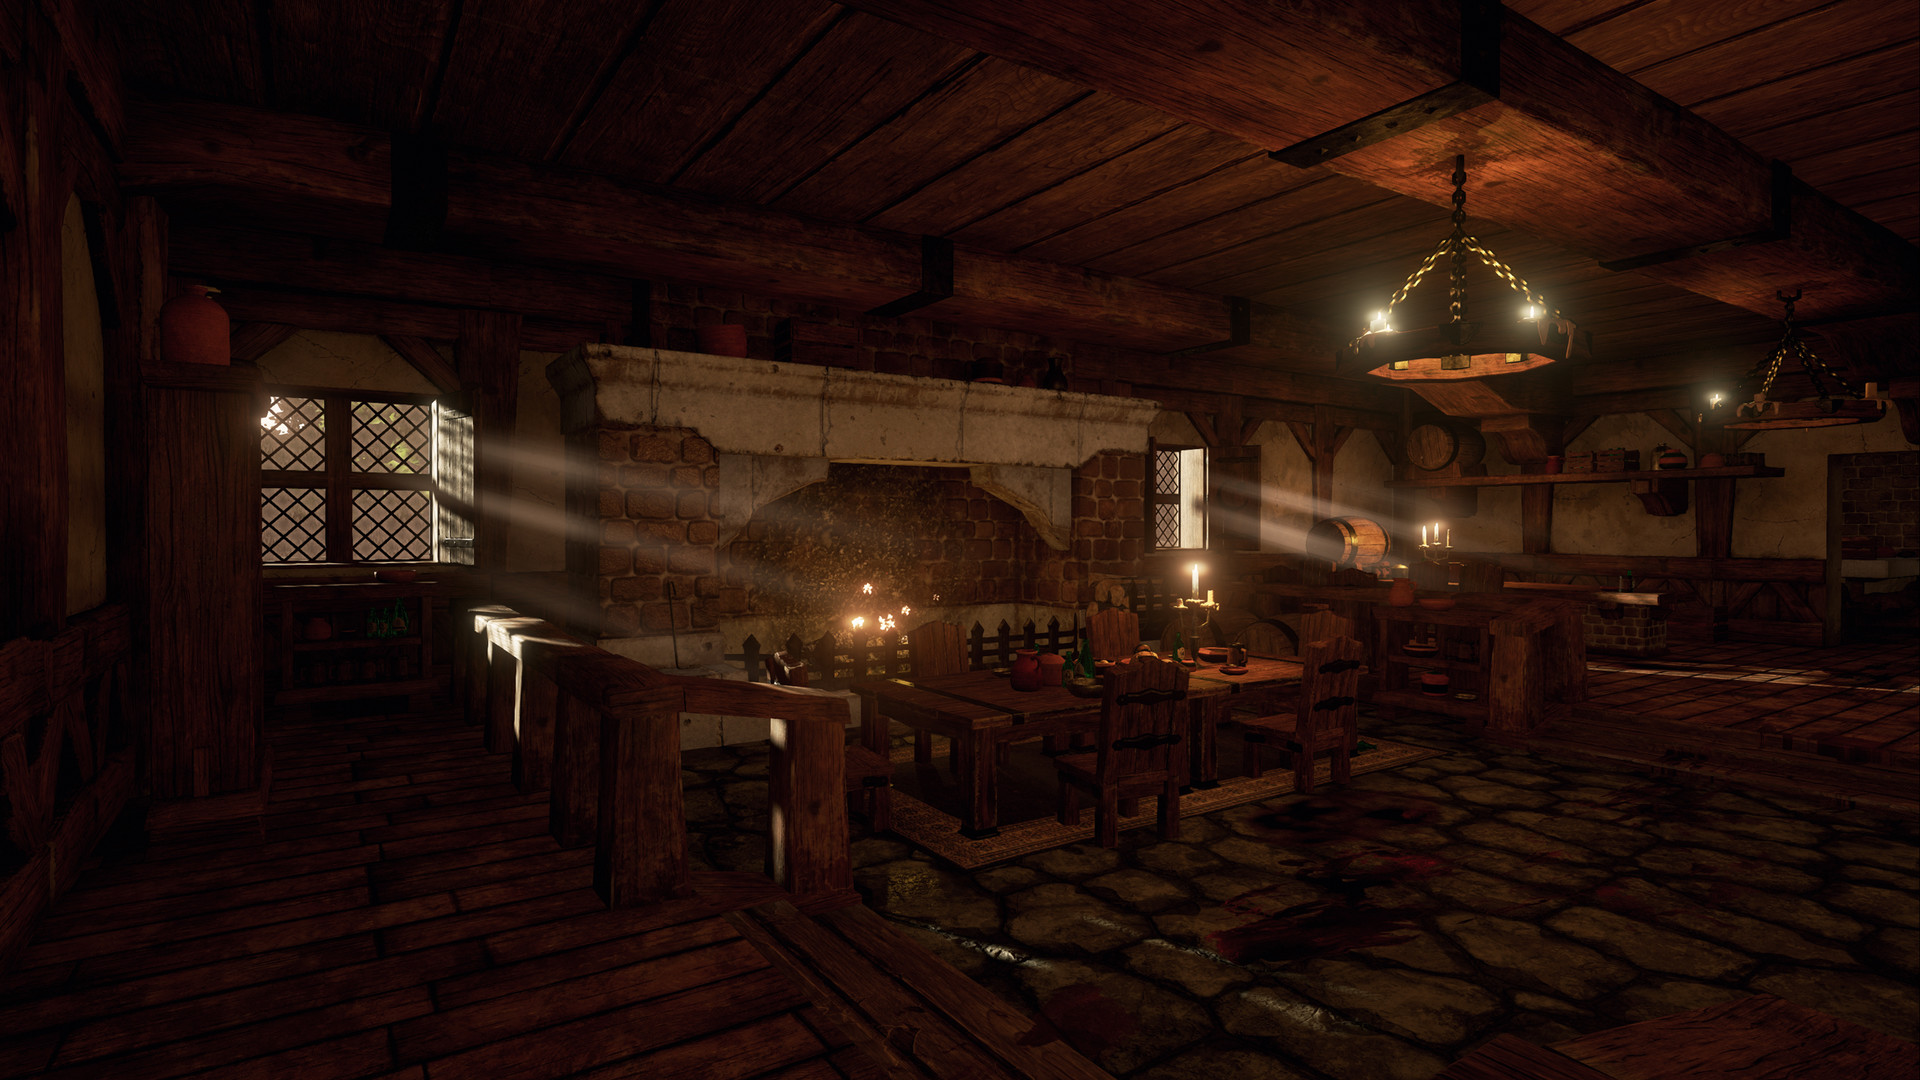 WoW’s Goldshire Inn Looks Great In Unreal Engine 4, Despite The Murder